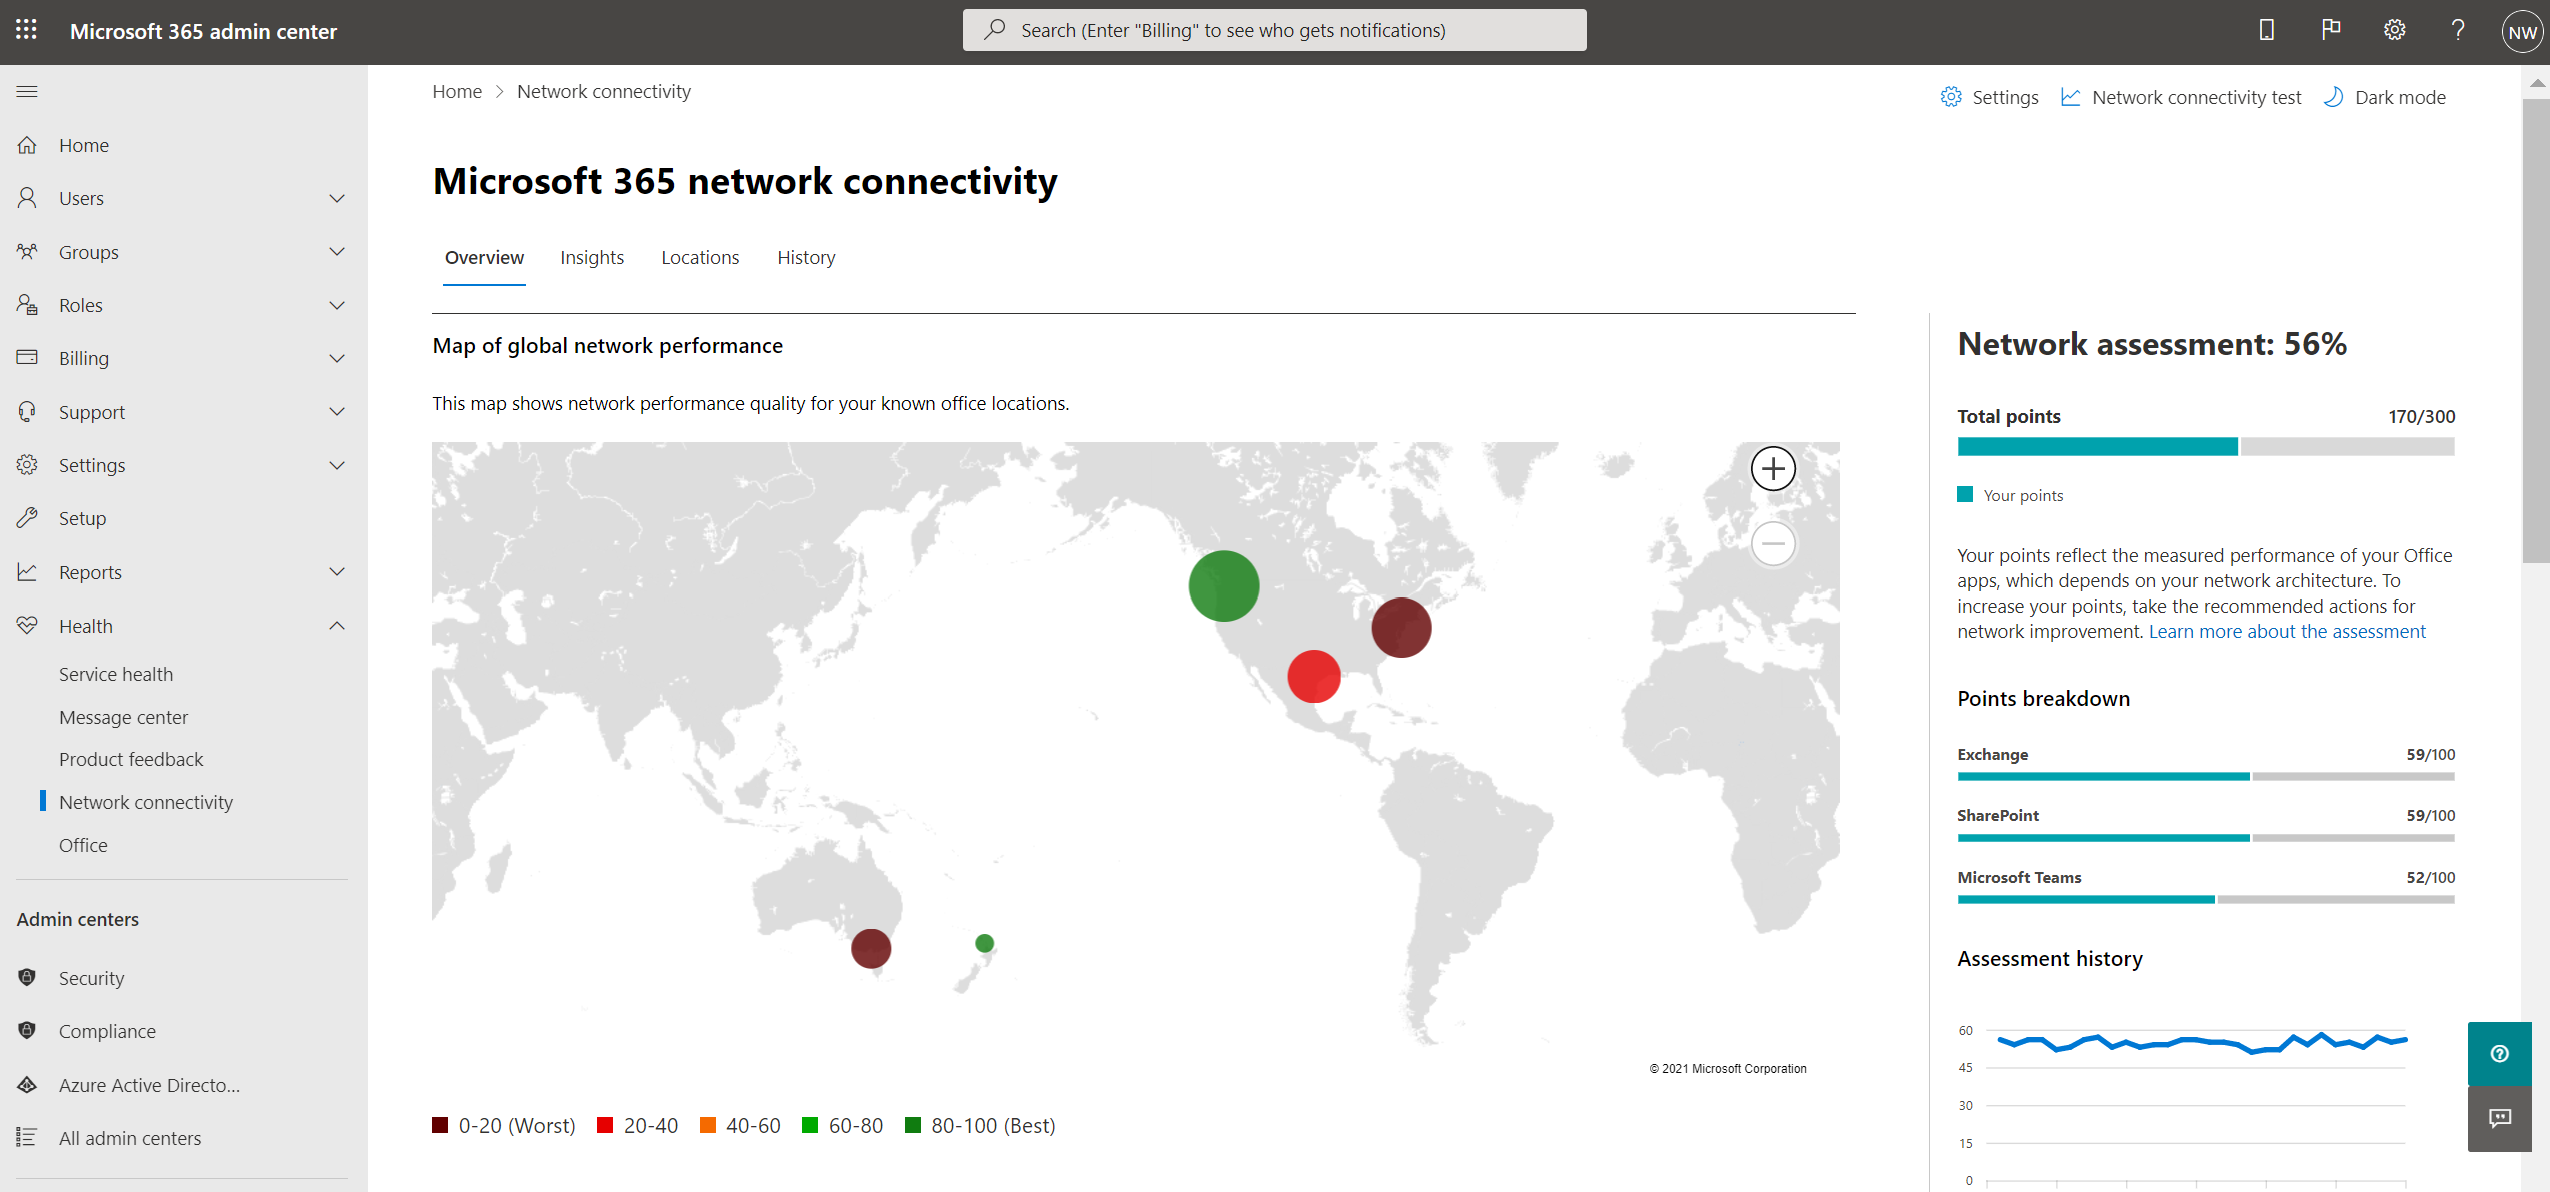 Network connectivity test tool.